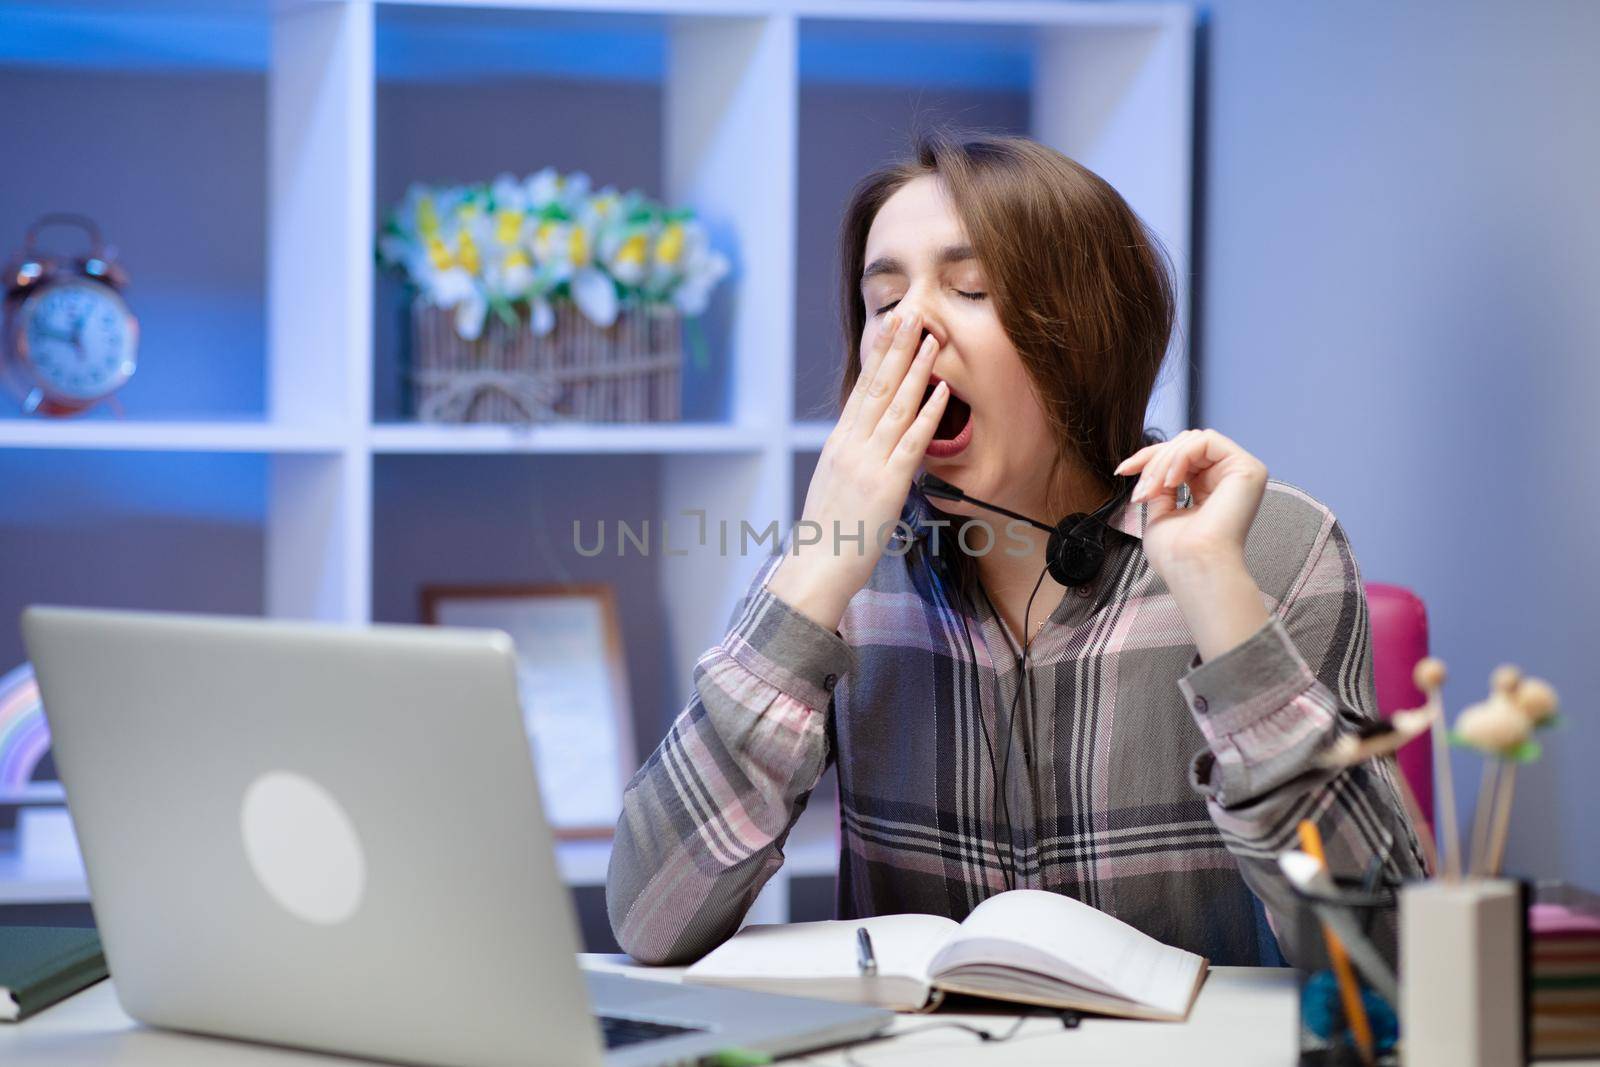 Tired woman yawning, sitting at table with laptop, lazy student doing homework, preparing to pass exam, sleepy girl working on computer after sleepless night, lack of sleep and boredom concept by uflypro